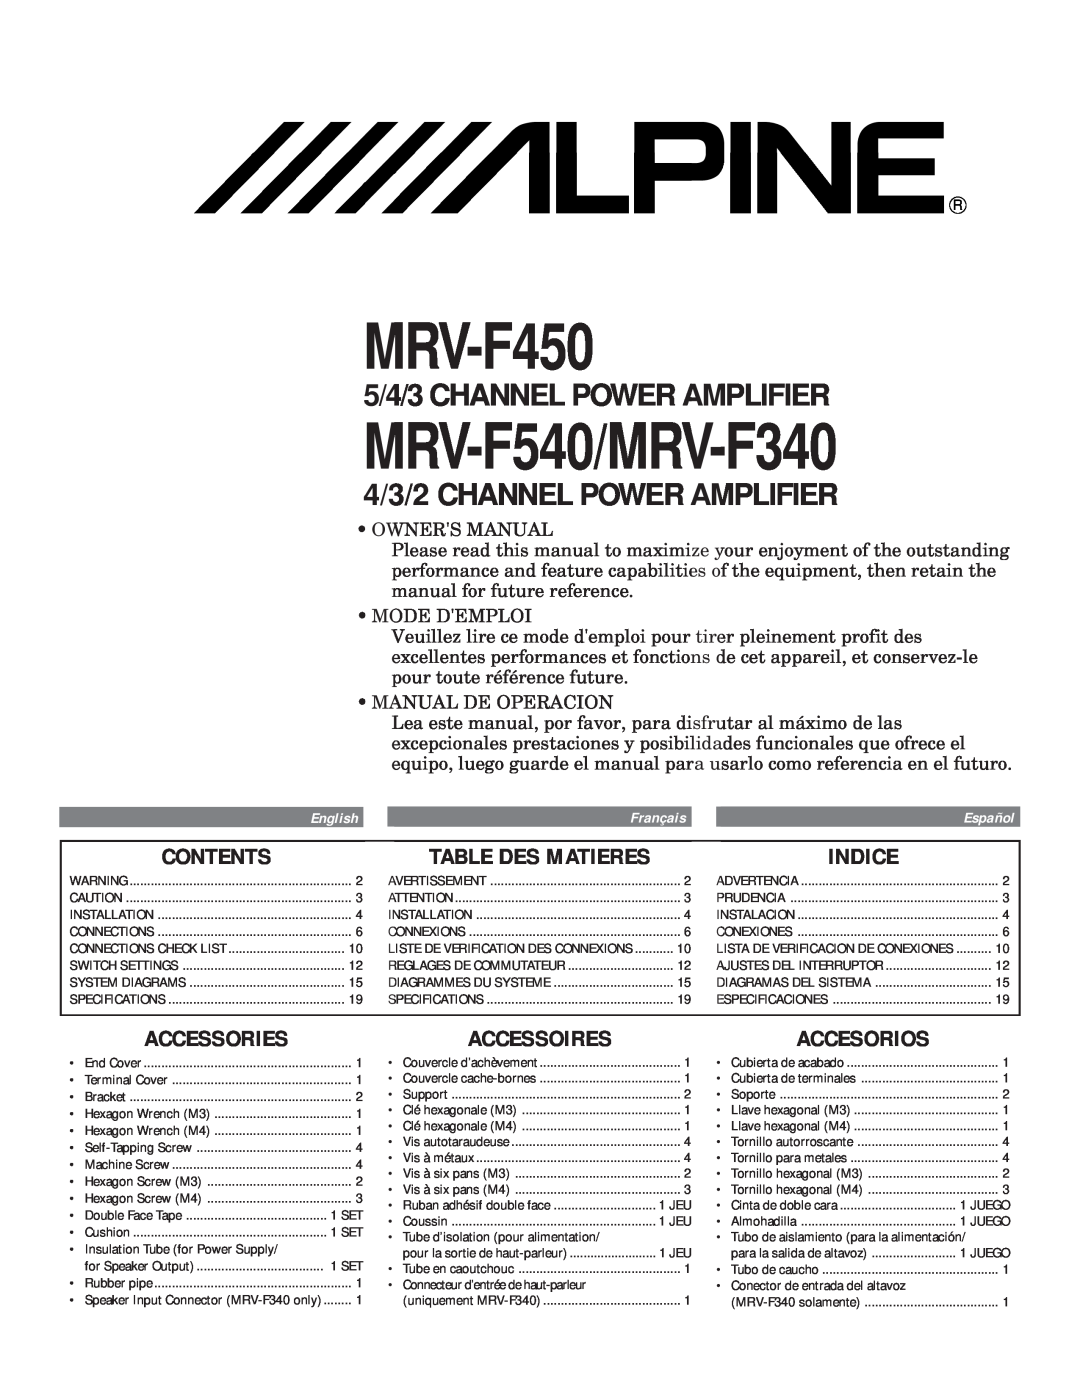 Alpine MRV-F340 owner manual Contents, Indice, Accessories, Accessoires, Accesorios, Table Des Matieres, MRV-F450 